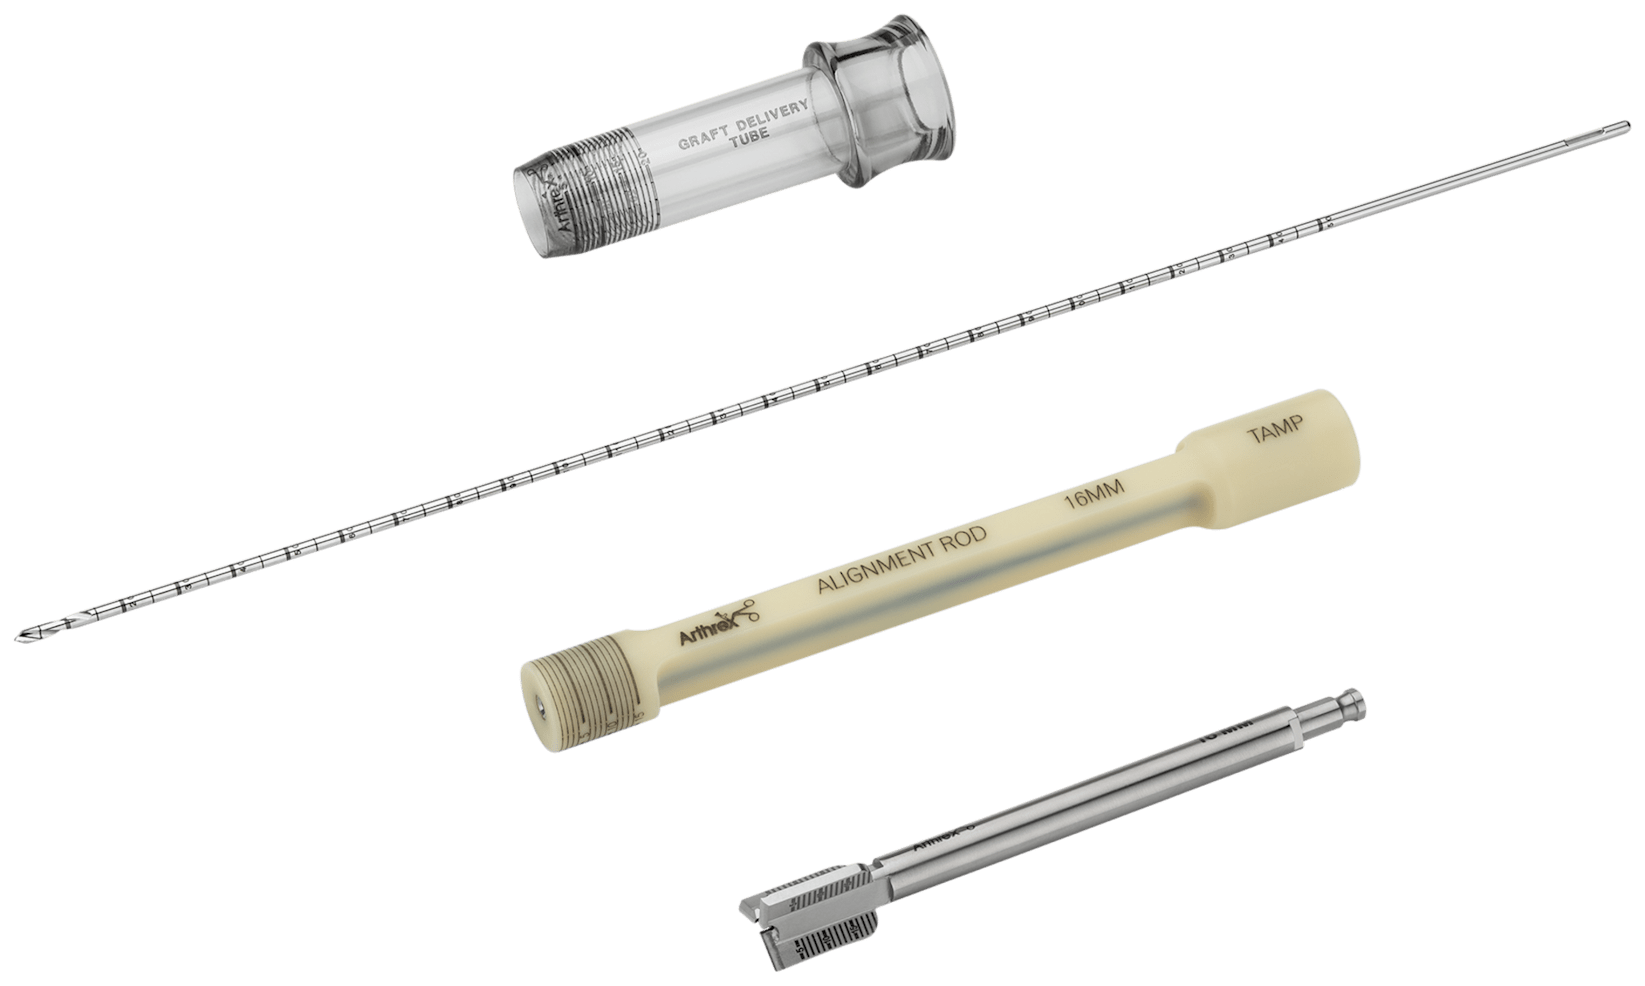 Osteochondral Allograft Transfer System (OATS), with 16 mm Flat Headed Reamer, Delivery Tube, Drill Pin Guide/Dilator/Tamp and 2.4 mm Drill Tipped Guide Pin